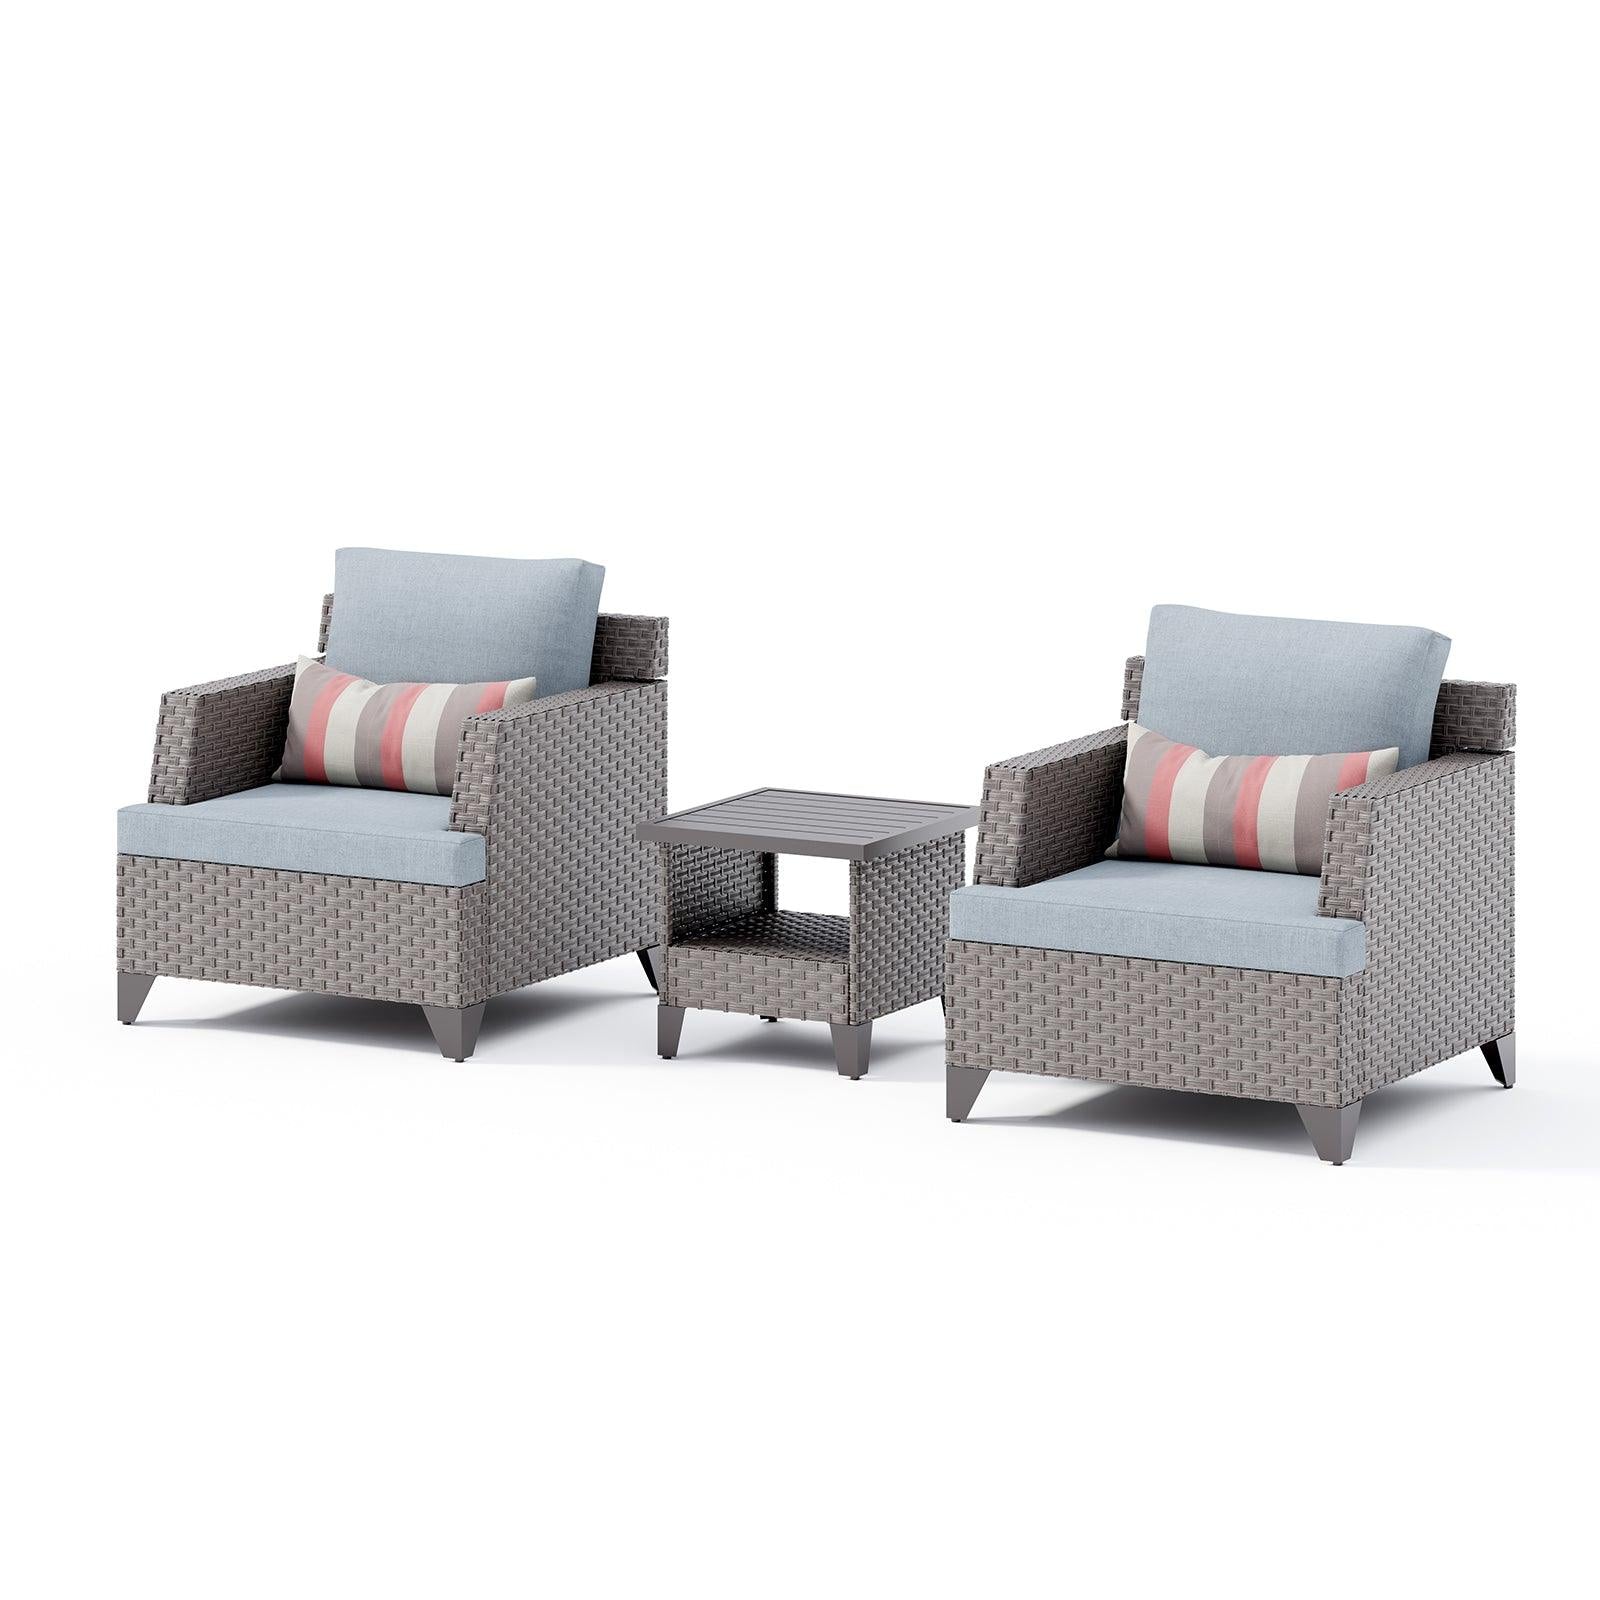 Charleston Outdoor Sectional Set, Taupe Rattan & Grey Cushion sale best sale #Pieces_3-pc.